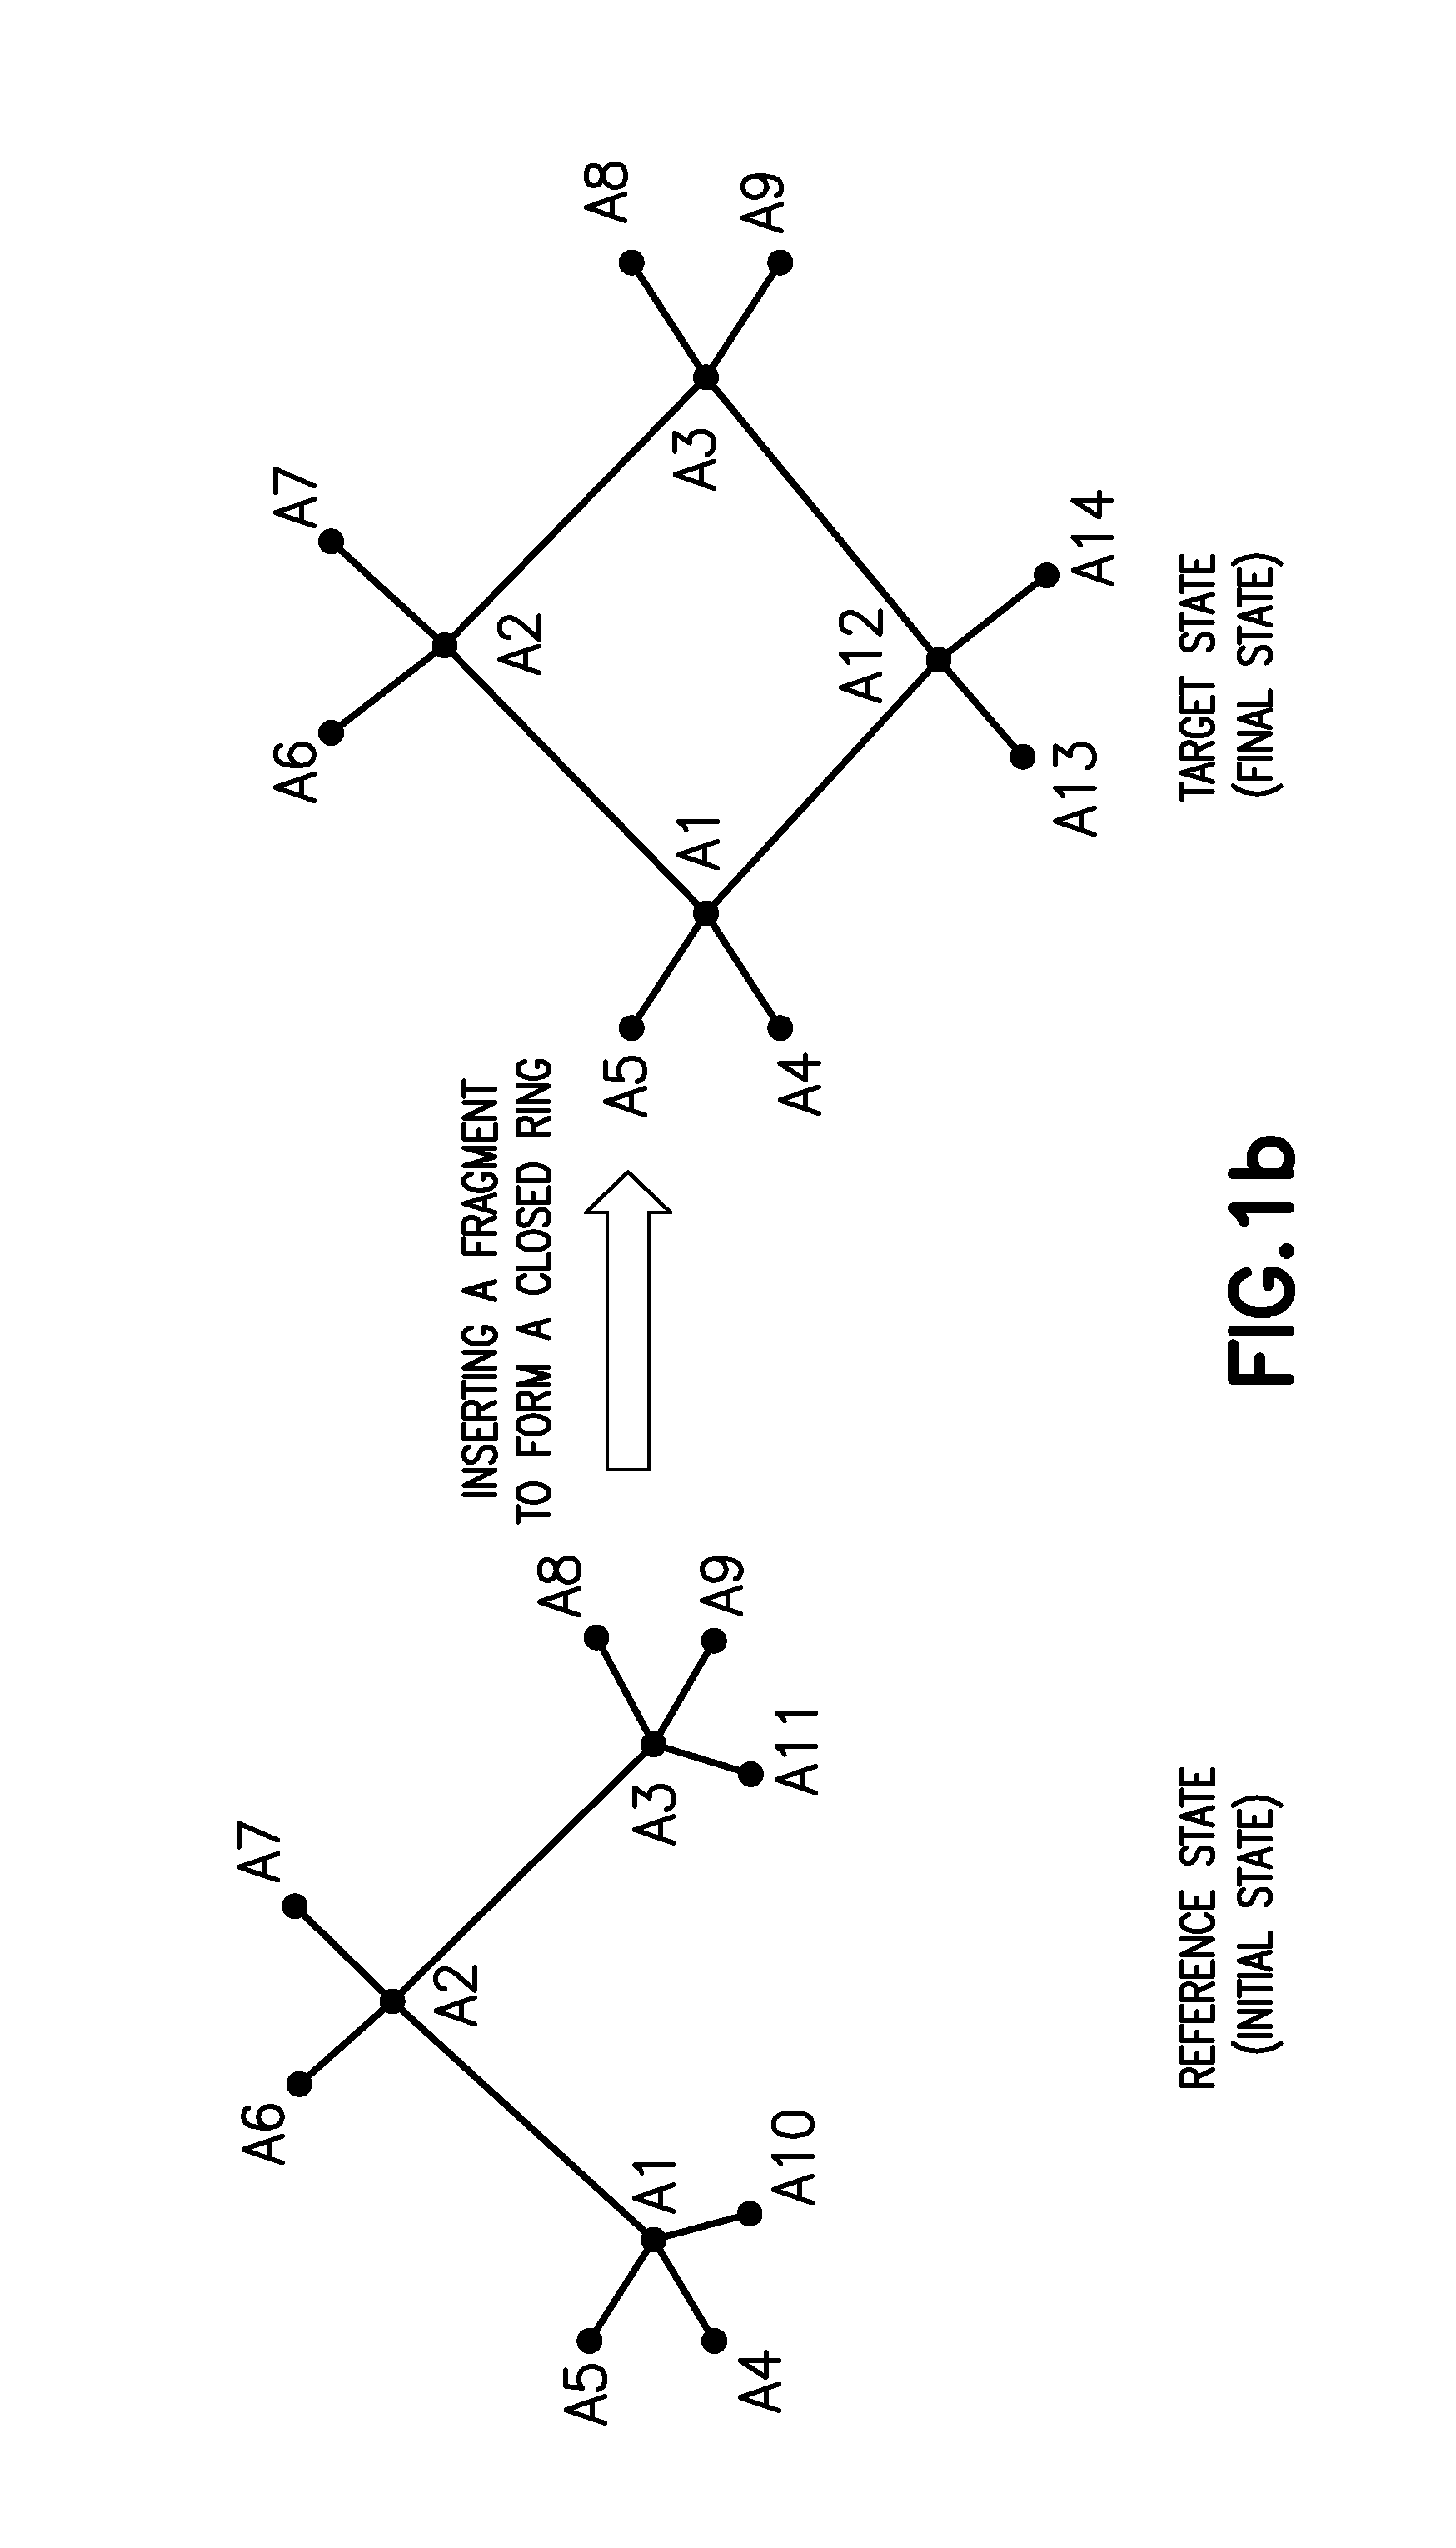 Methods and systems for calculating free energy differences using a modified bond stretch potential